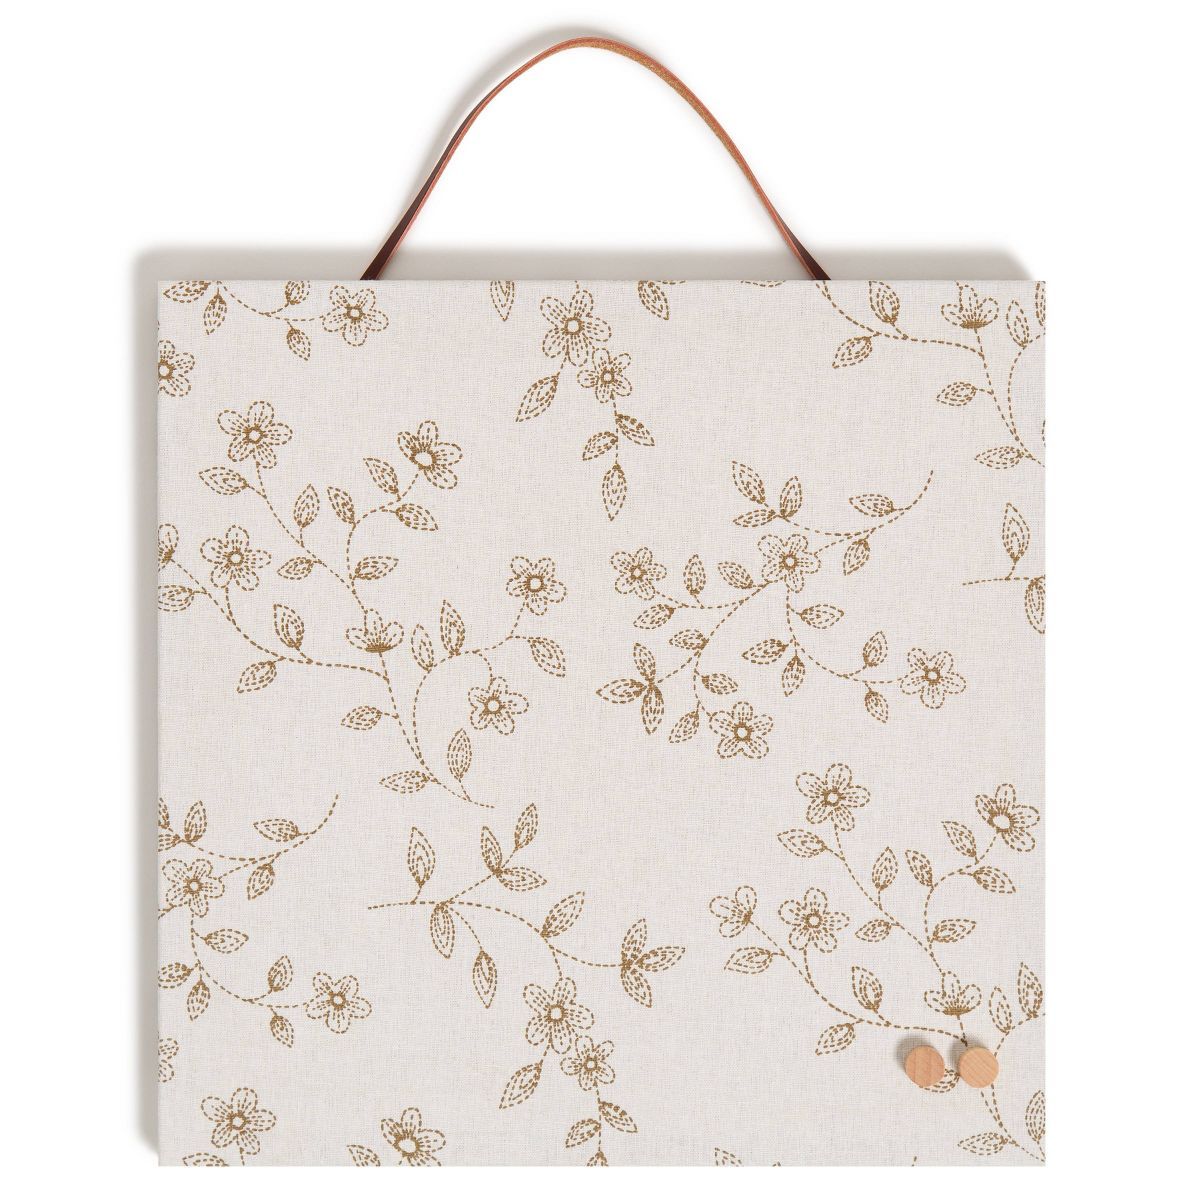 U Brands 12"x12" Printed Linen Bulletin Board with Leather Strap - Boho Floral | Target